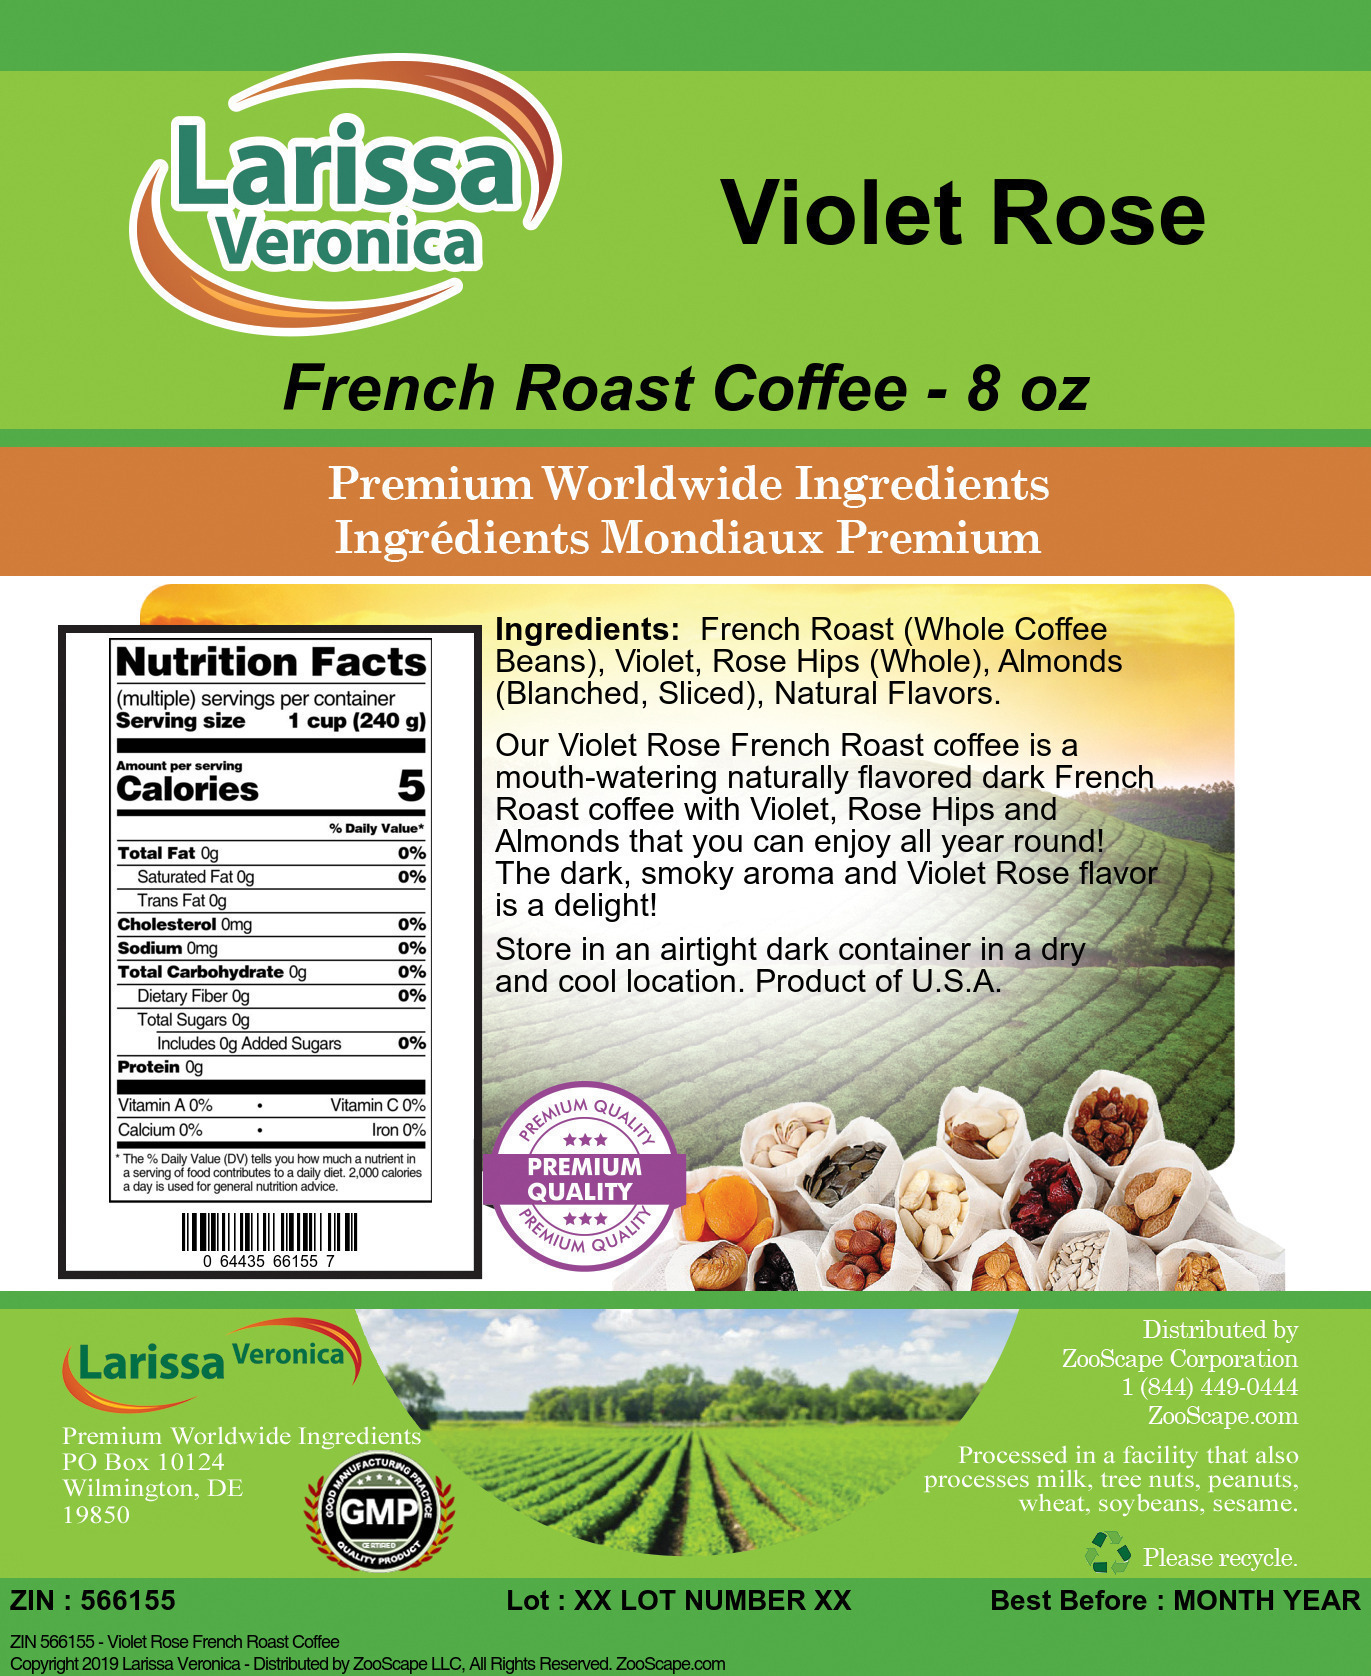 Violet Rose French Roast Coffee - Label